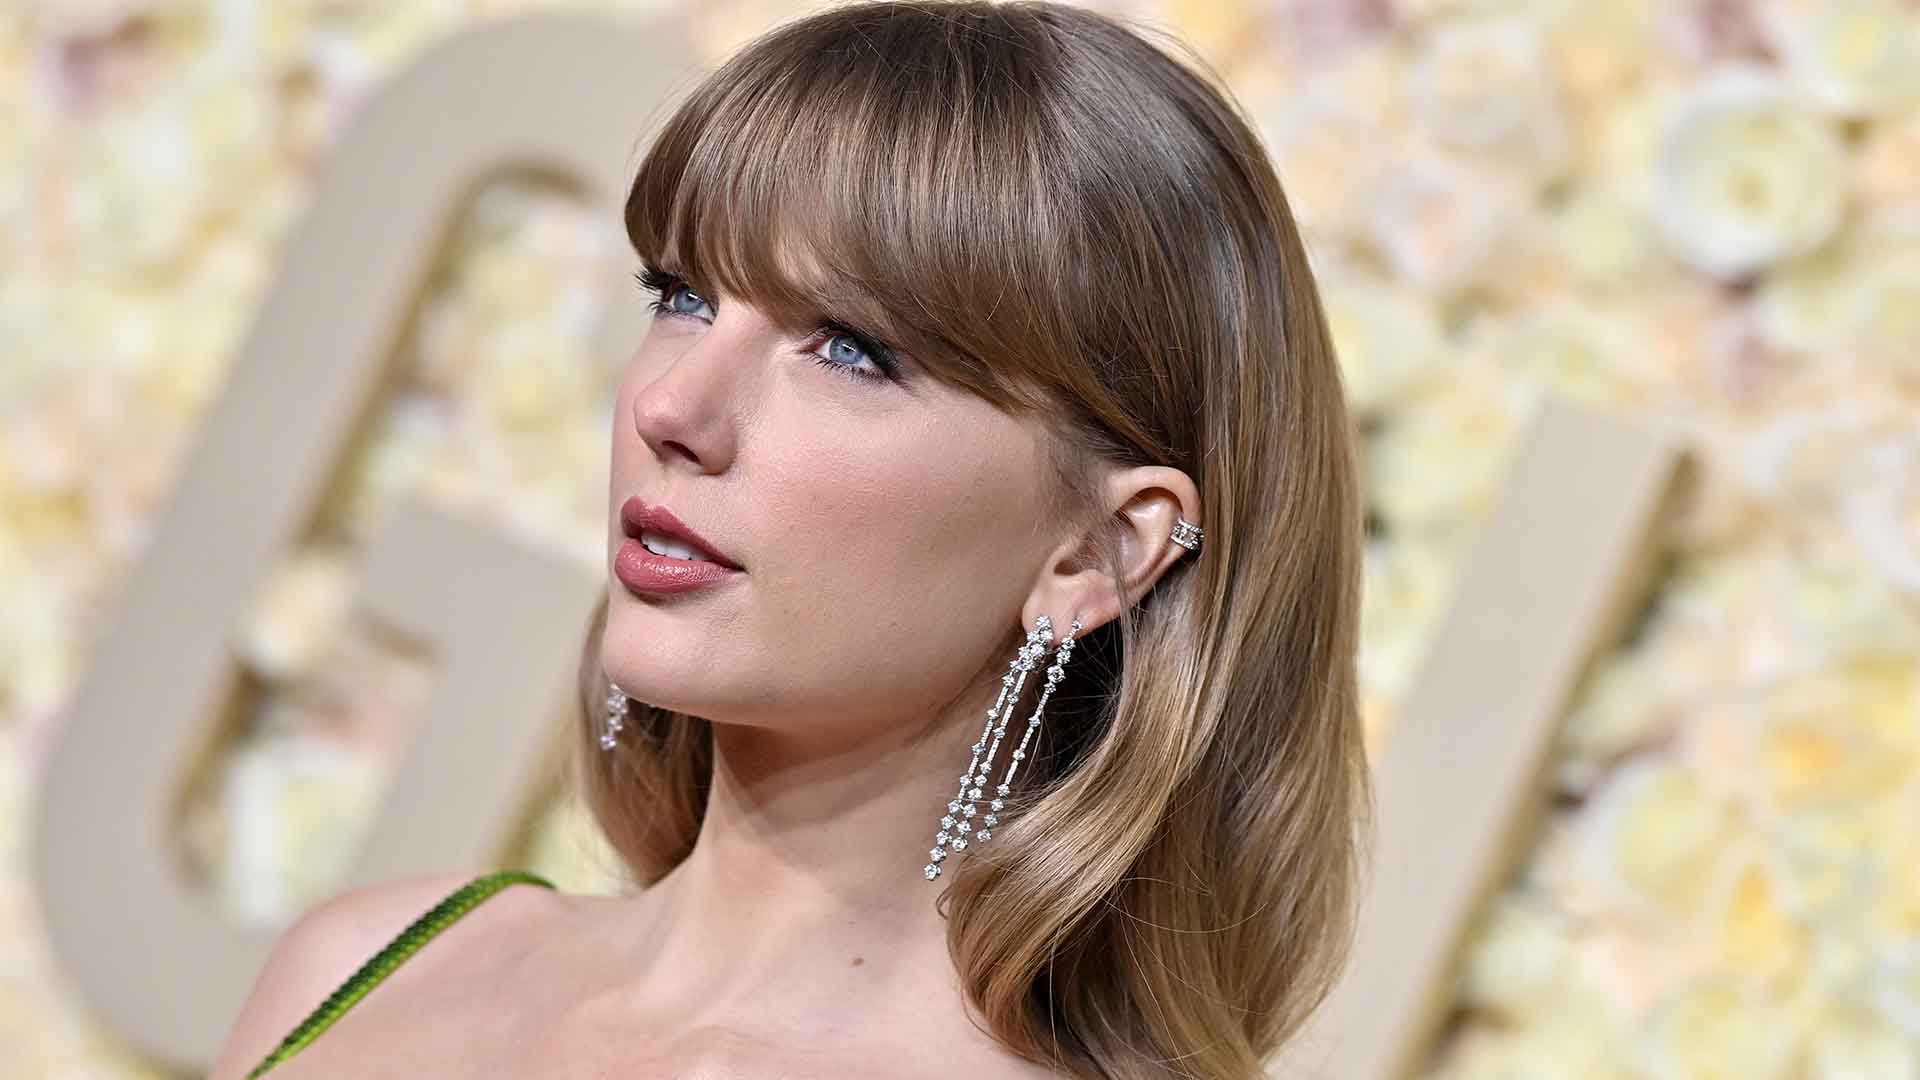 Taylor Swift poses for the camera at a red carpet event